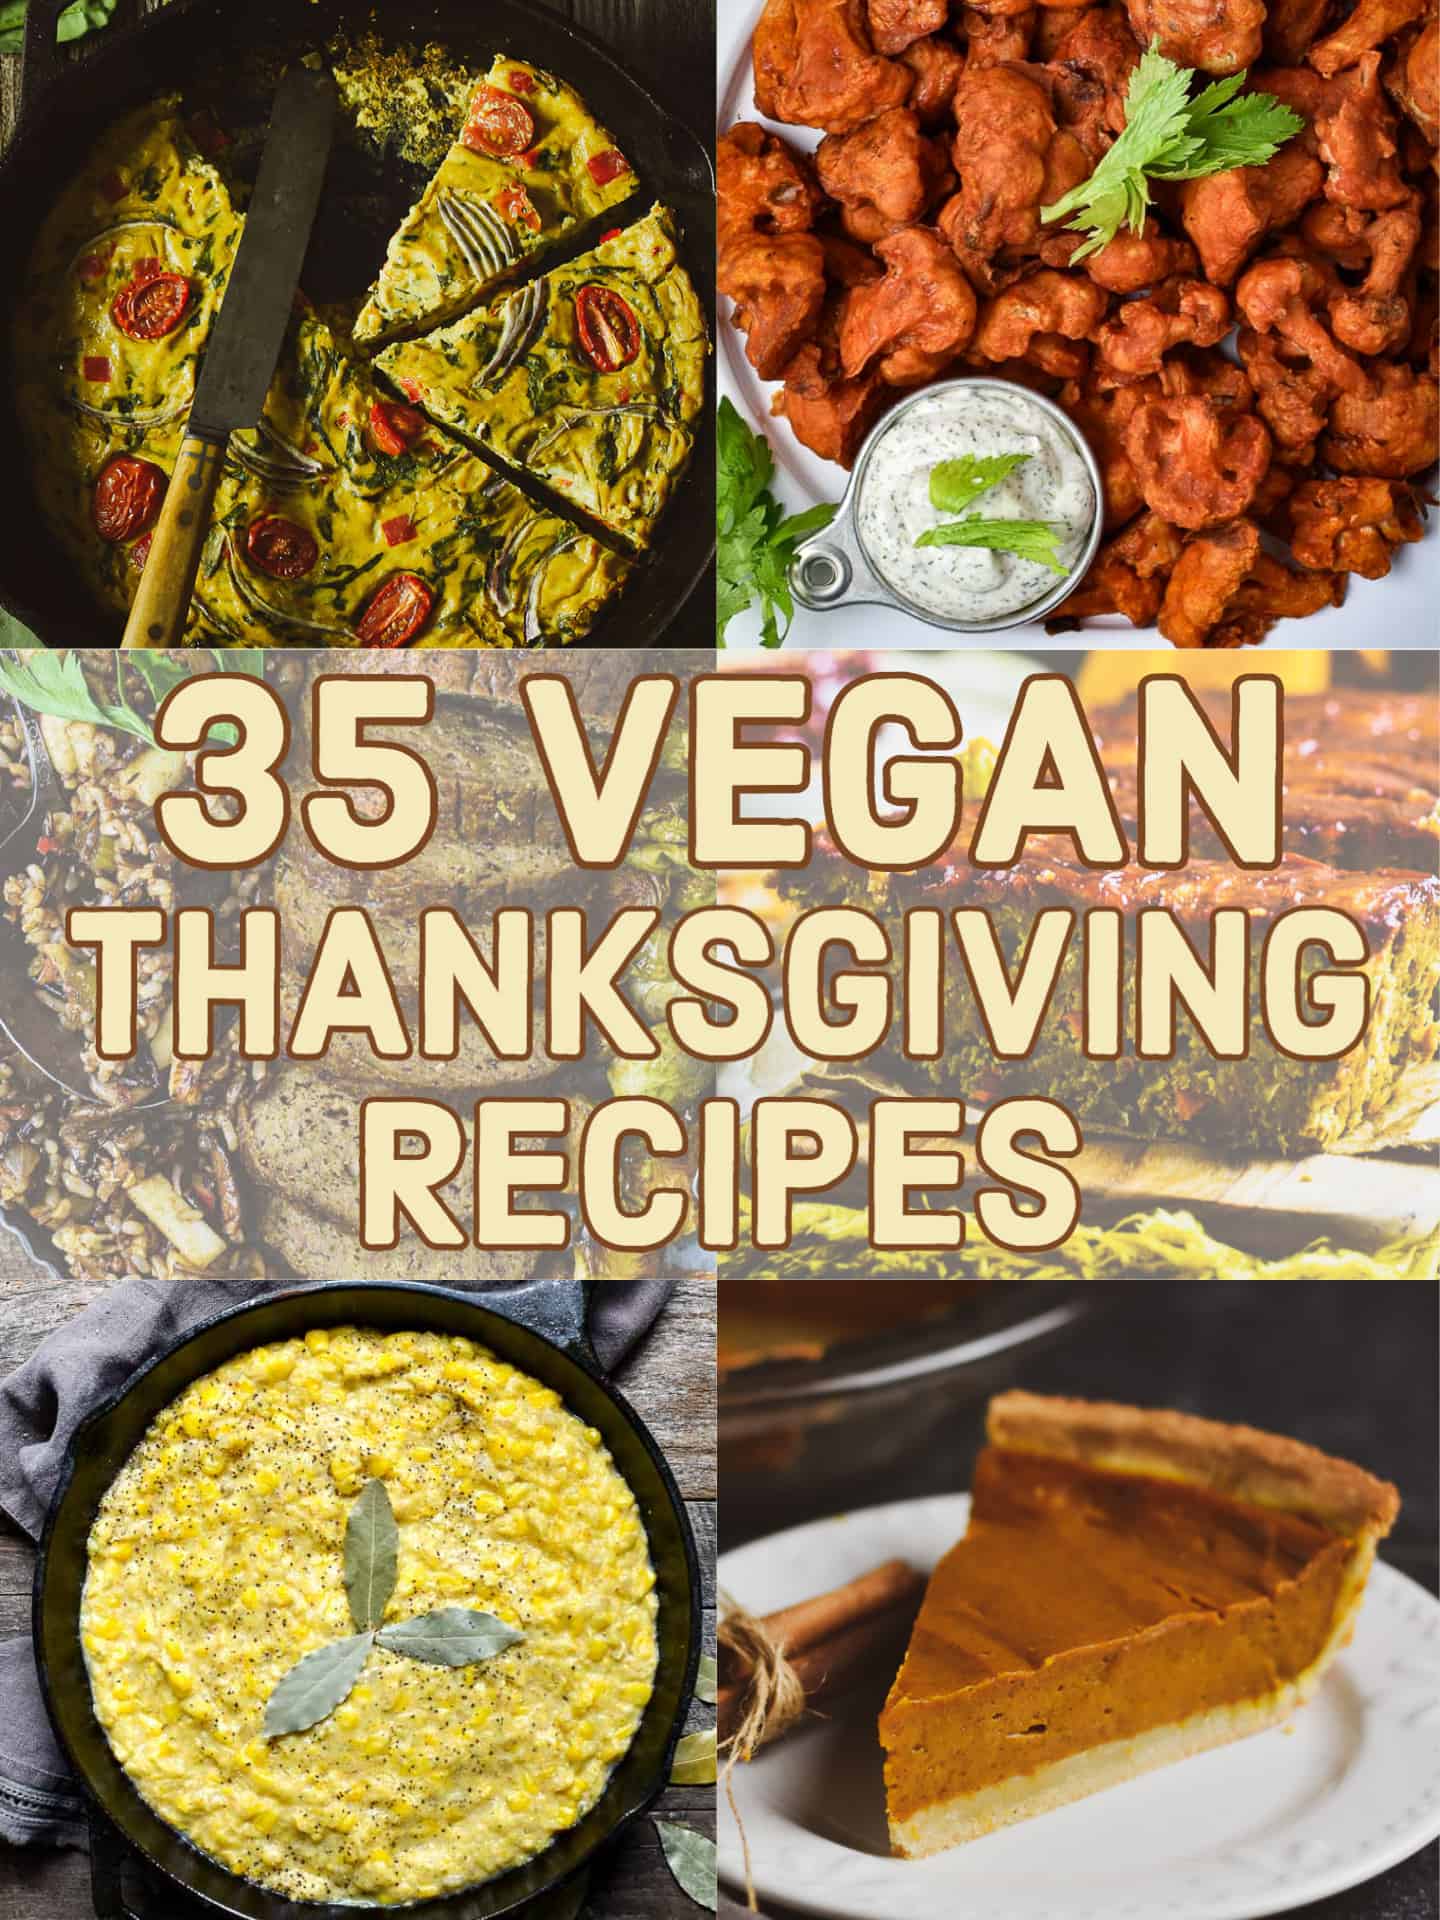 Vegan thanksgiving photo with different recipes.